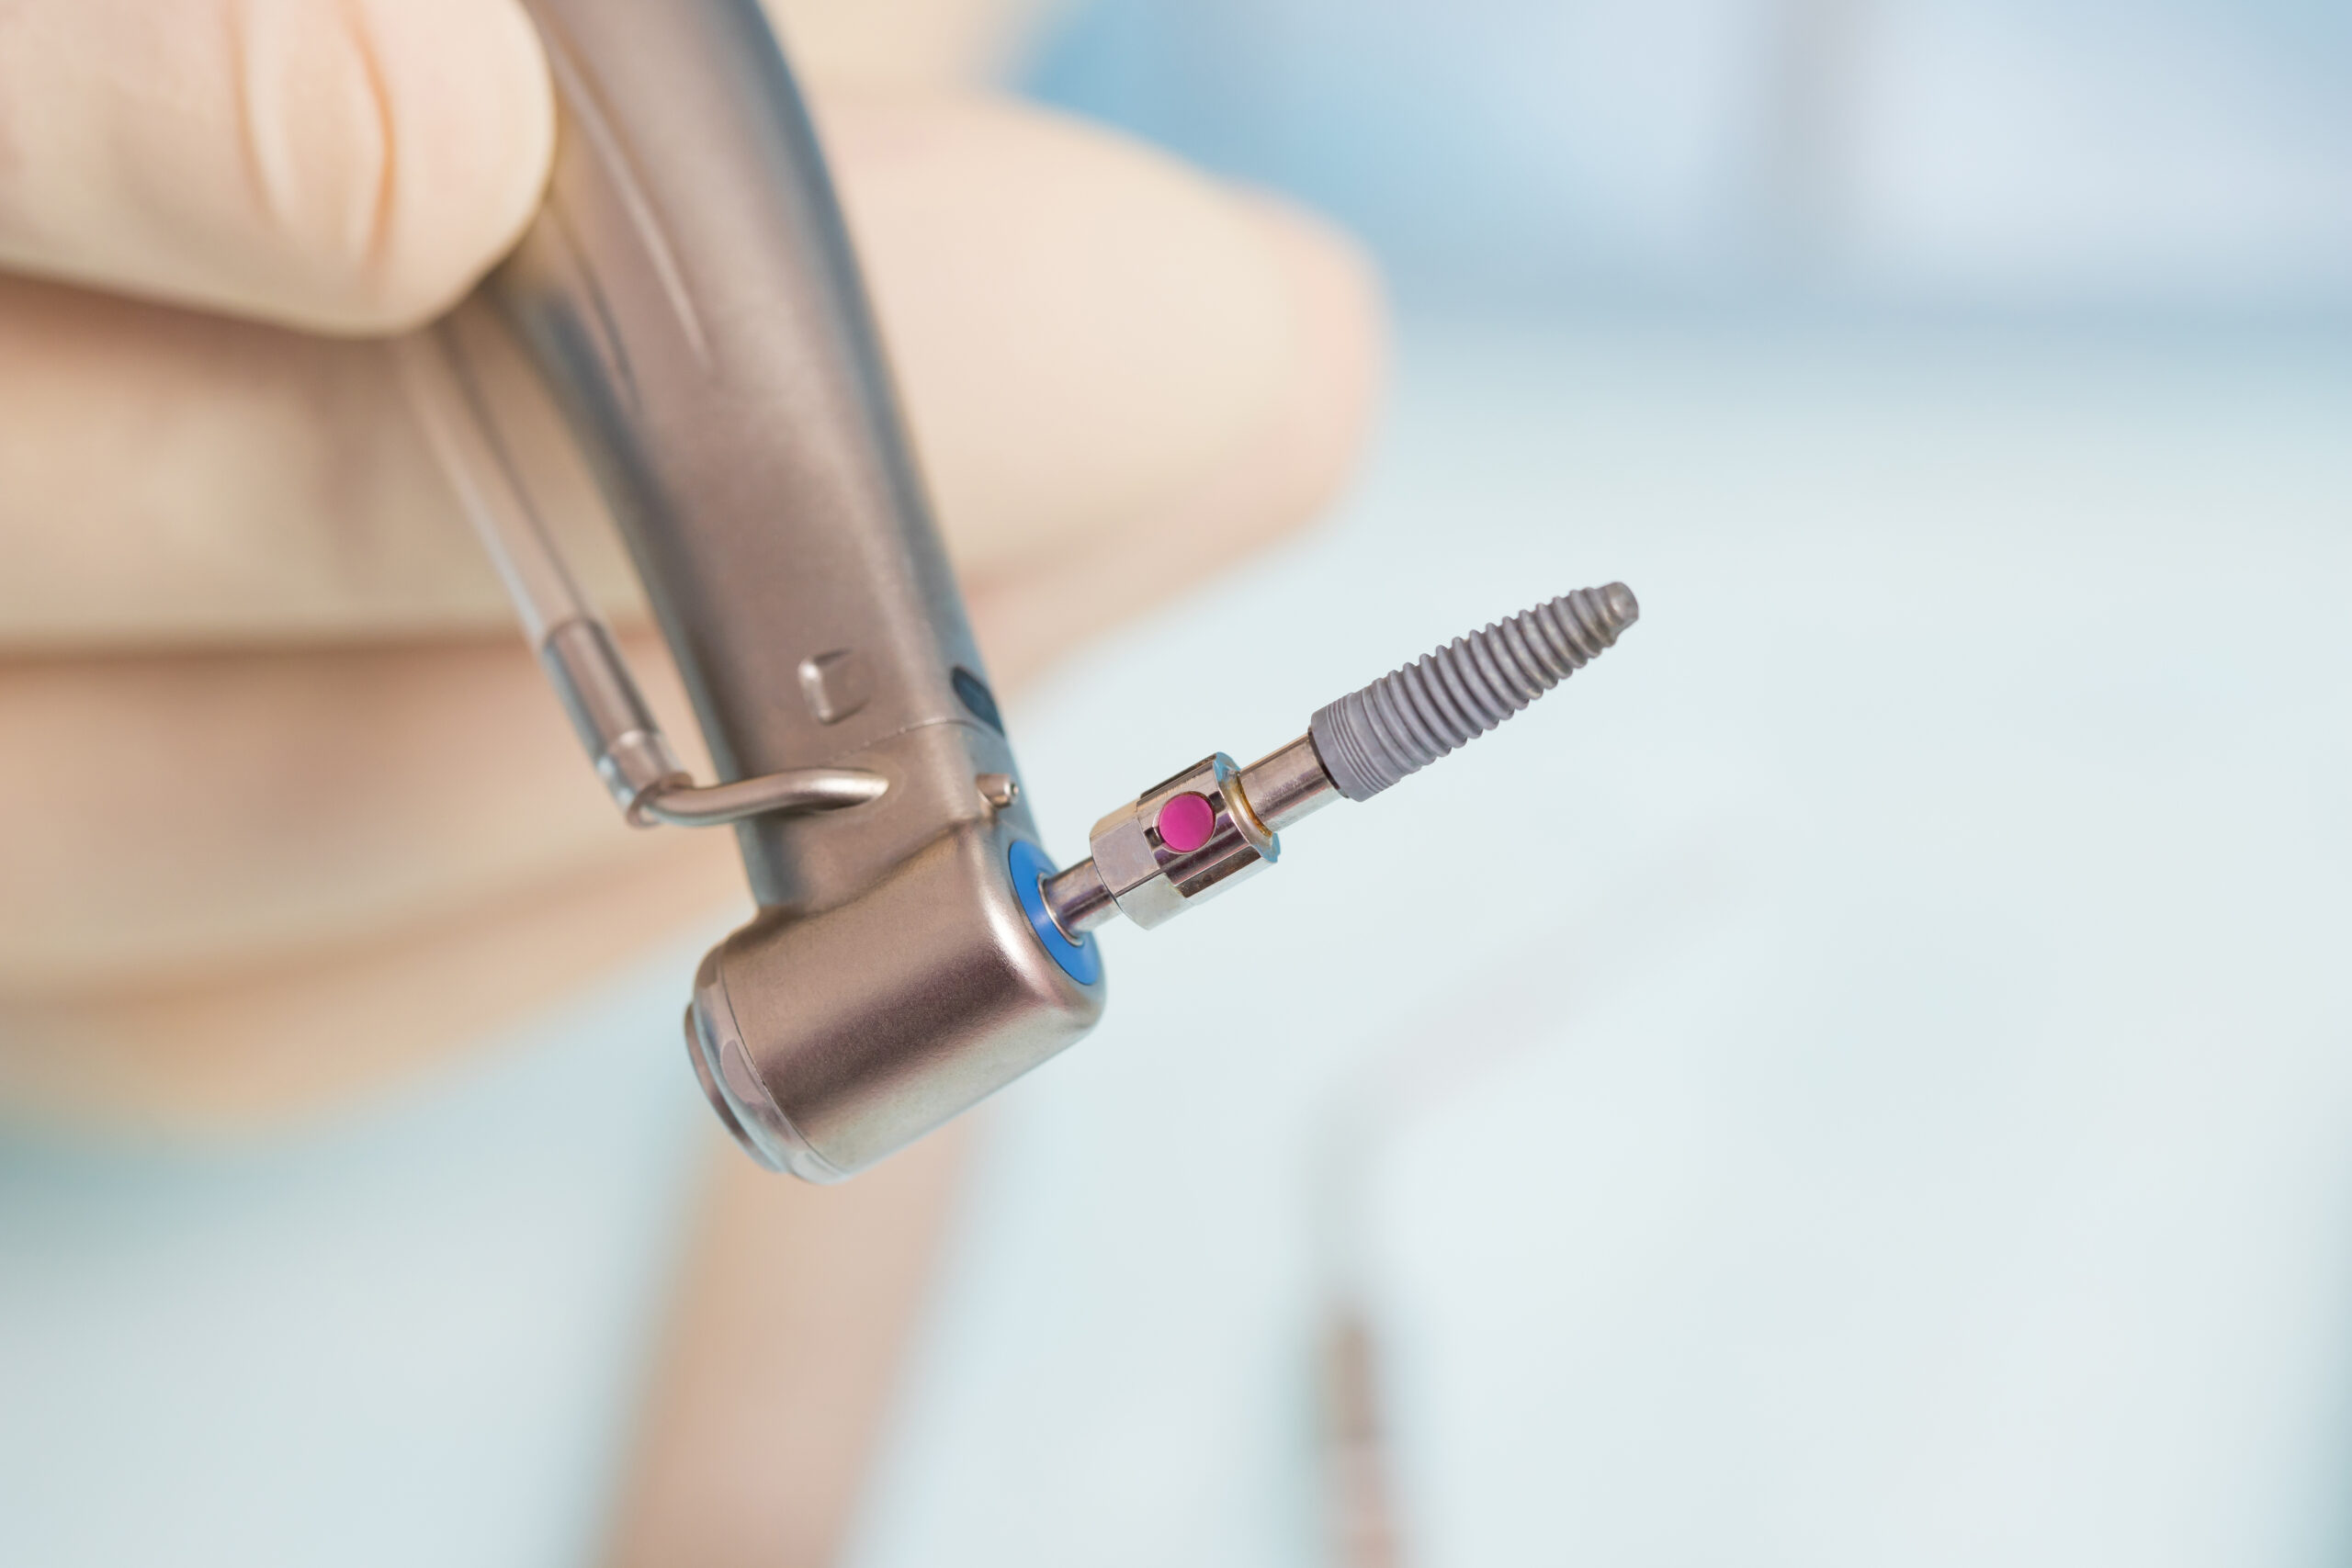 During the operation, the dentist holds implantation tools with a titanium implant. Close-up